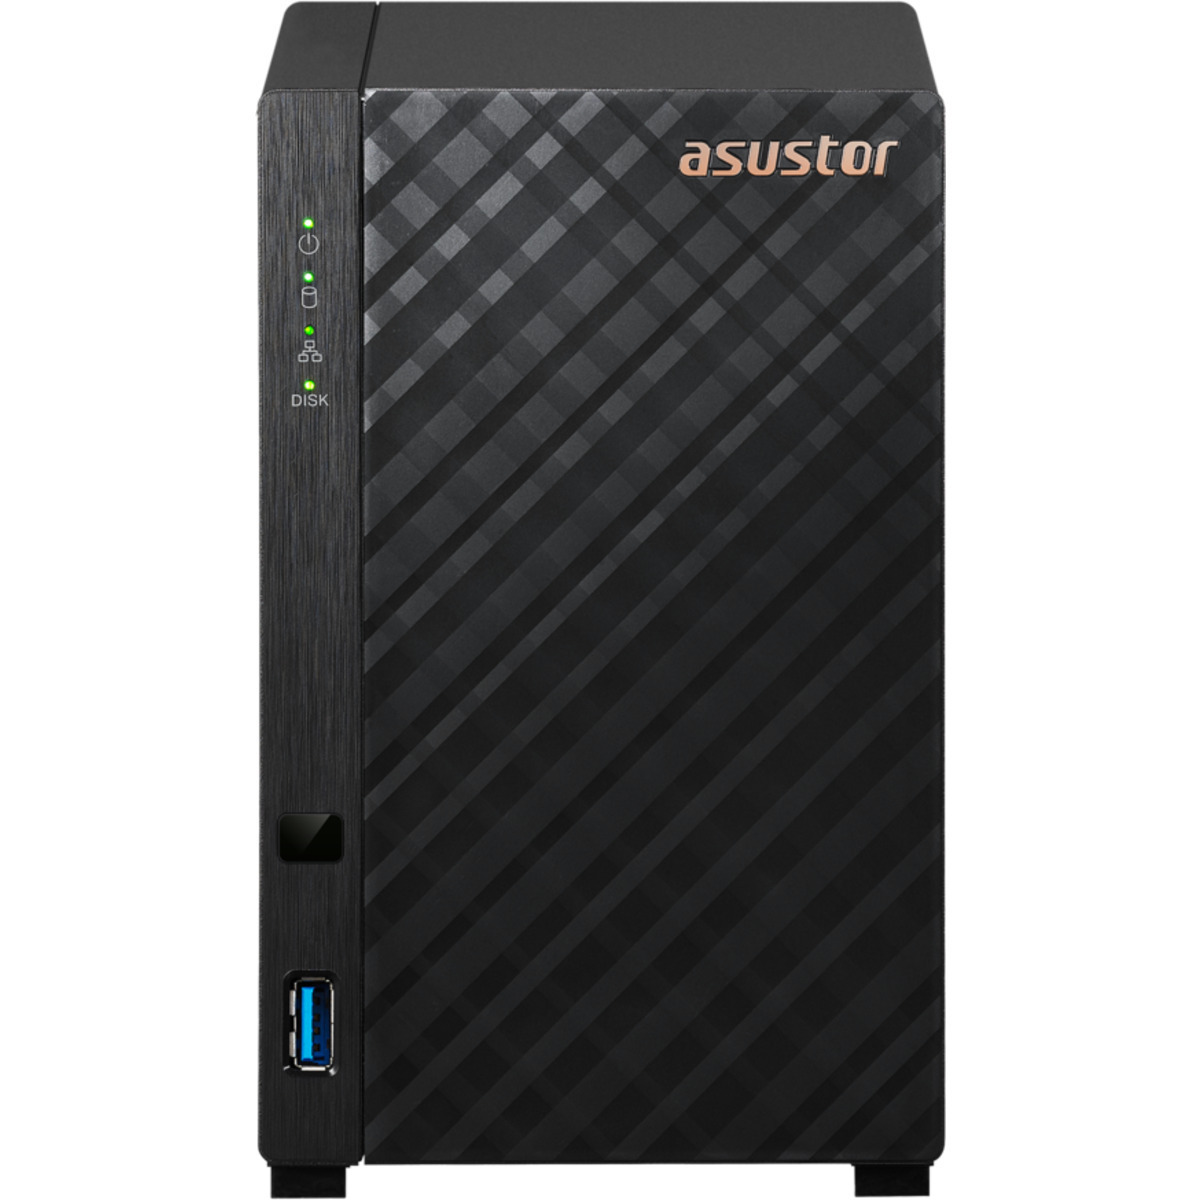 ASUSTOR DRIVESTOR 2 Lite AS1102TL 10tb 2-Bay Desktop Personal / Basic Home / Small Office NAS - Network Attached Storage Device 1x10tb Seagate IronWolf Pro ST10000NT001 3.5 7200rpm SATA 6Gb/s HDD NAS Class Drives Installed - Burn-In Tested - ON SALE DRIVESTOR 2 Lite AS1102TL